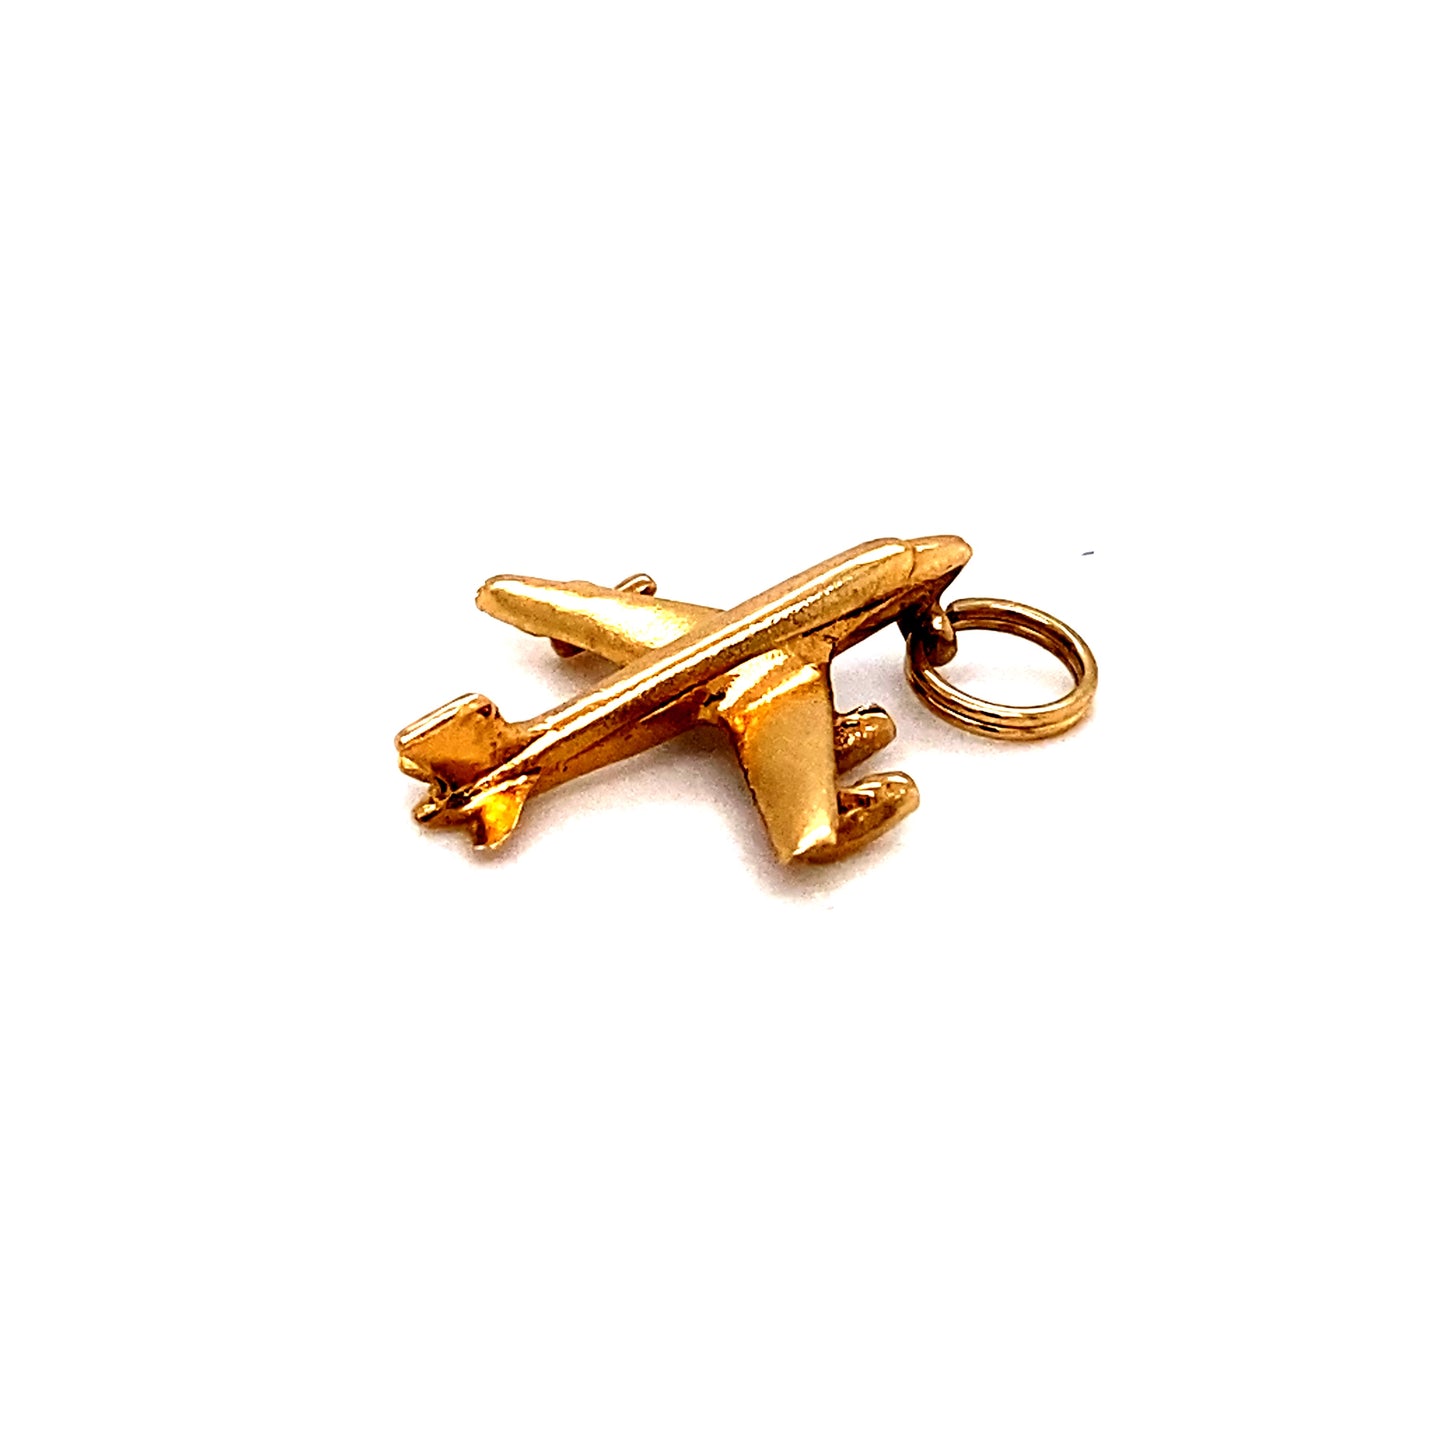 Vintage 1980s Airplane Charm in 14K Gold